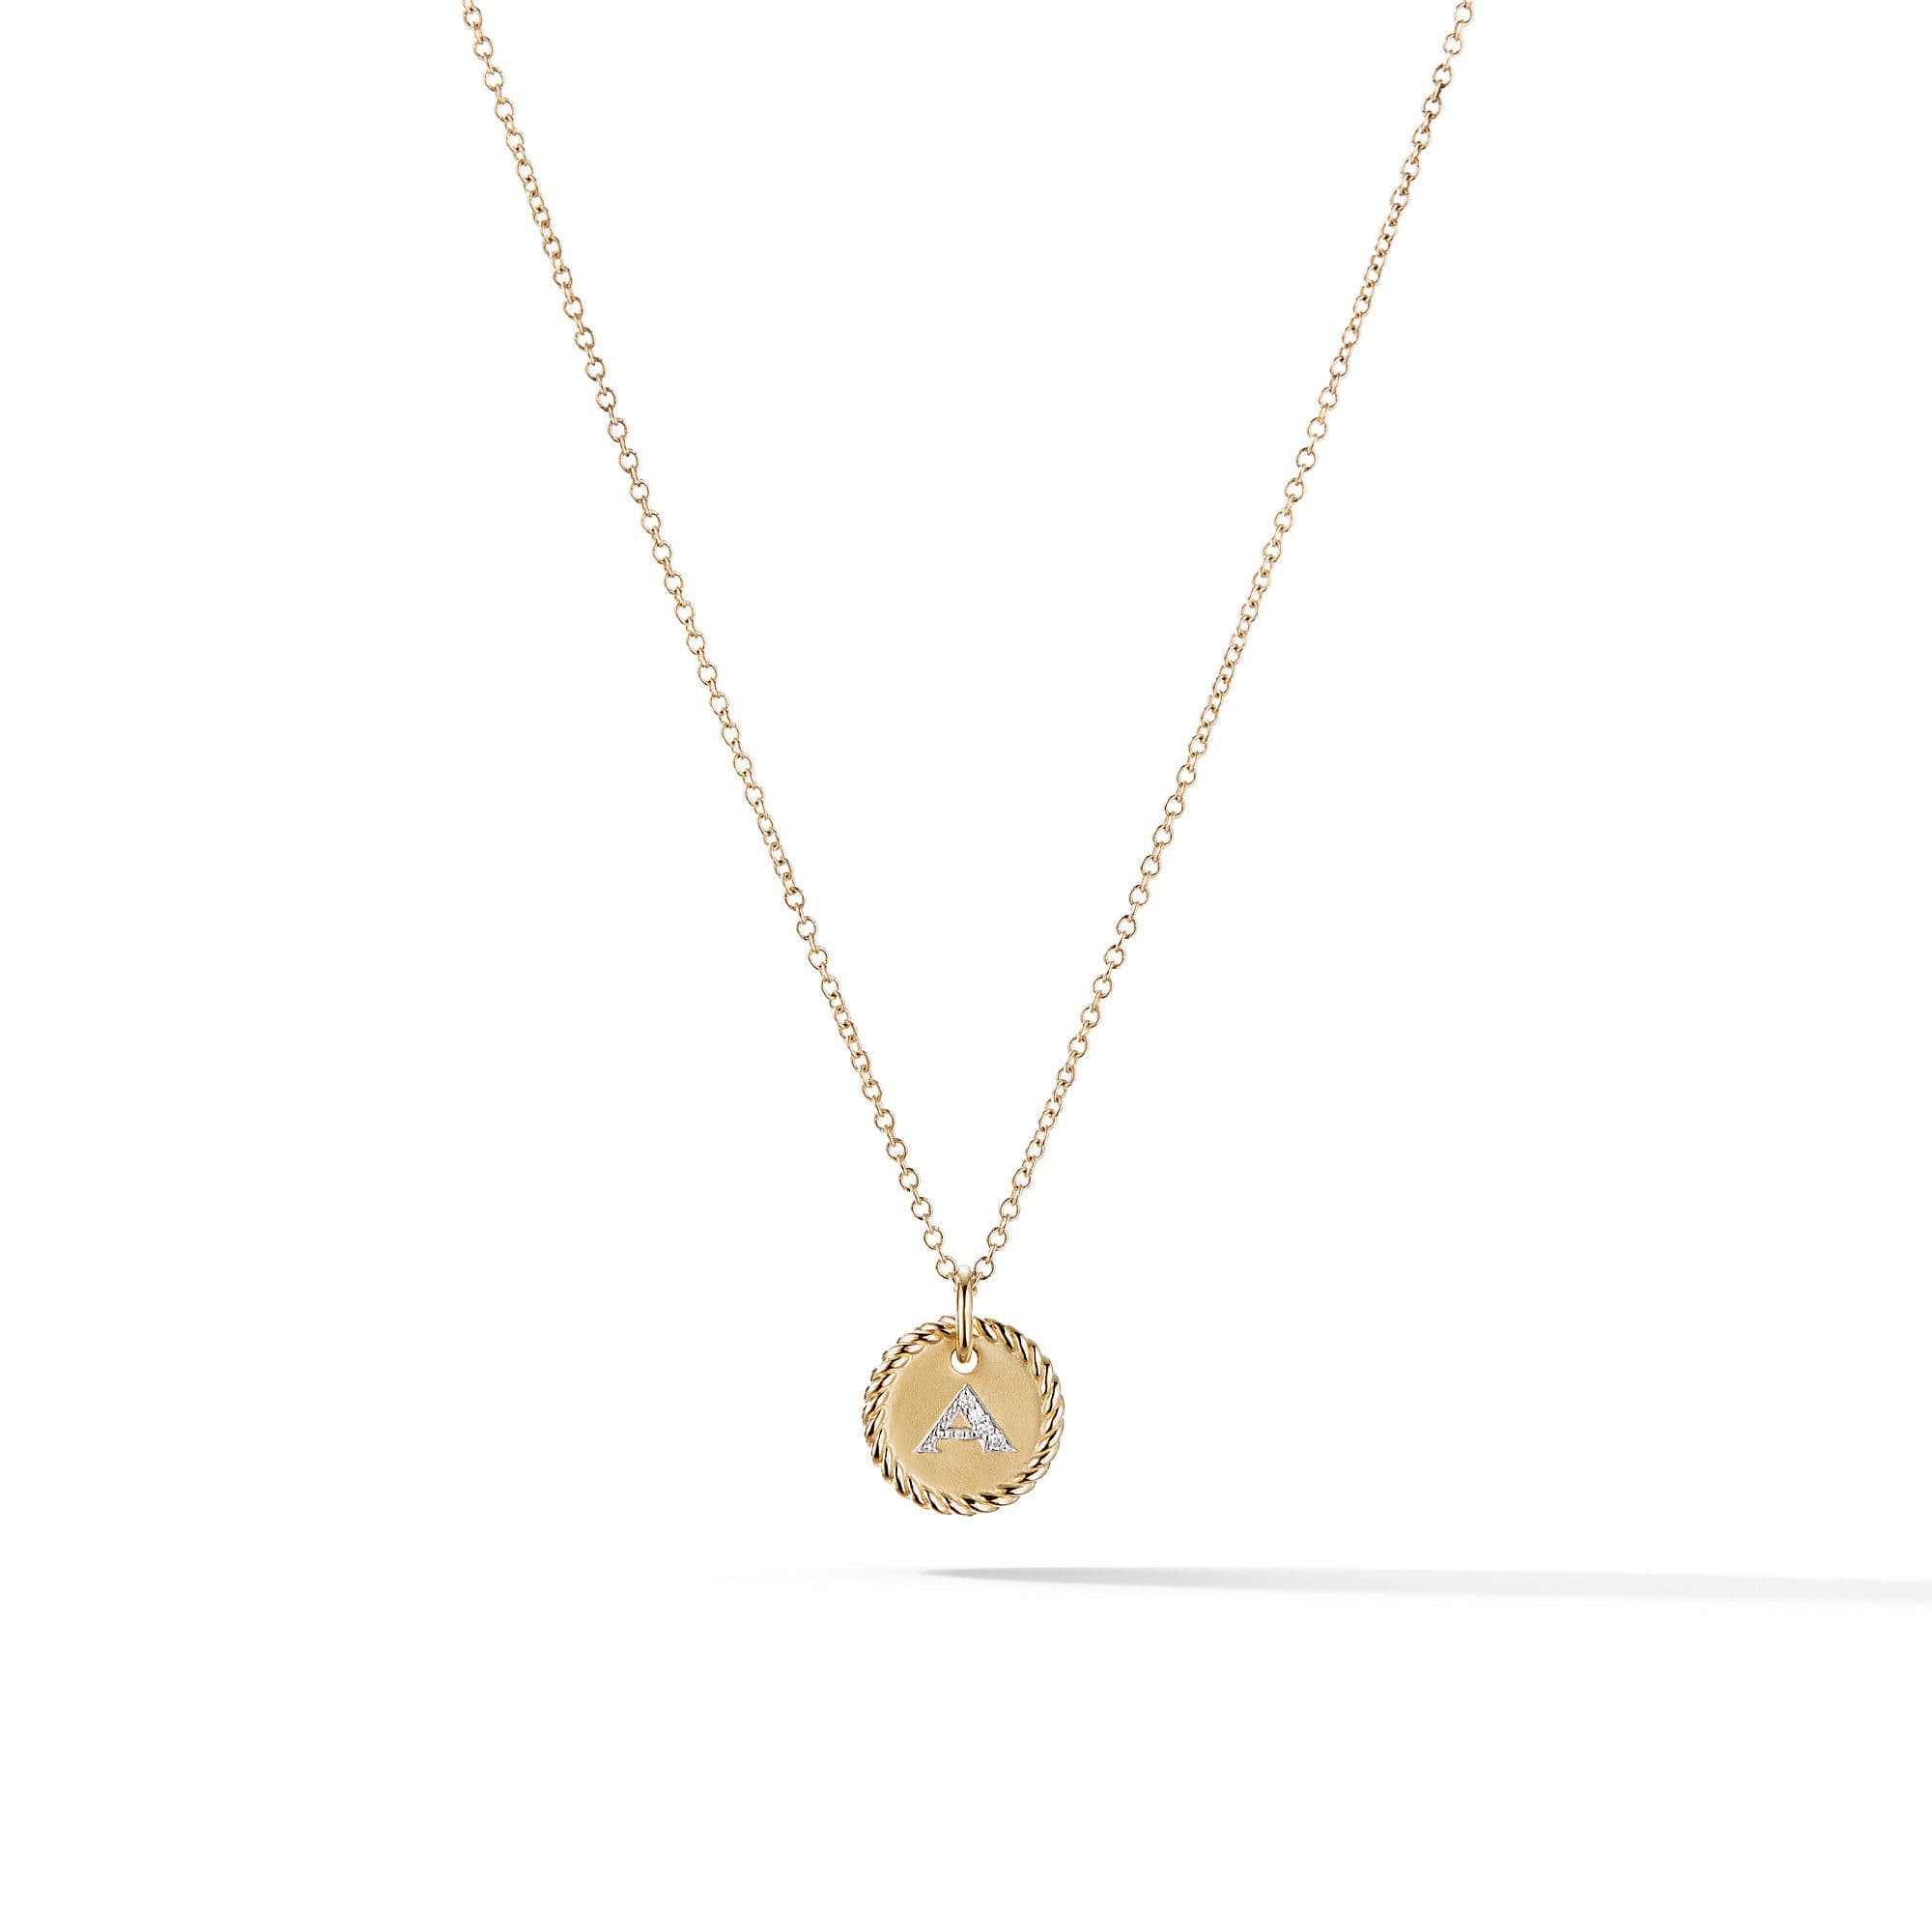 David Yurman A Initial Charm Necklace in 18k Yellow Gold with Diamonds